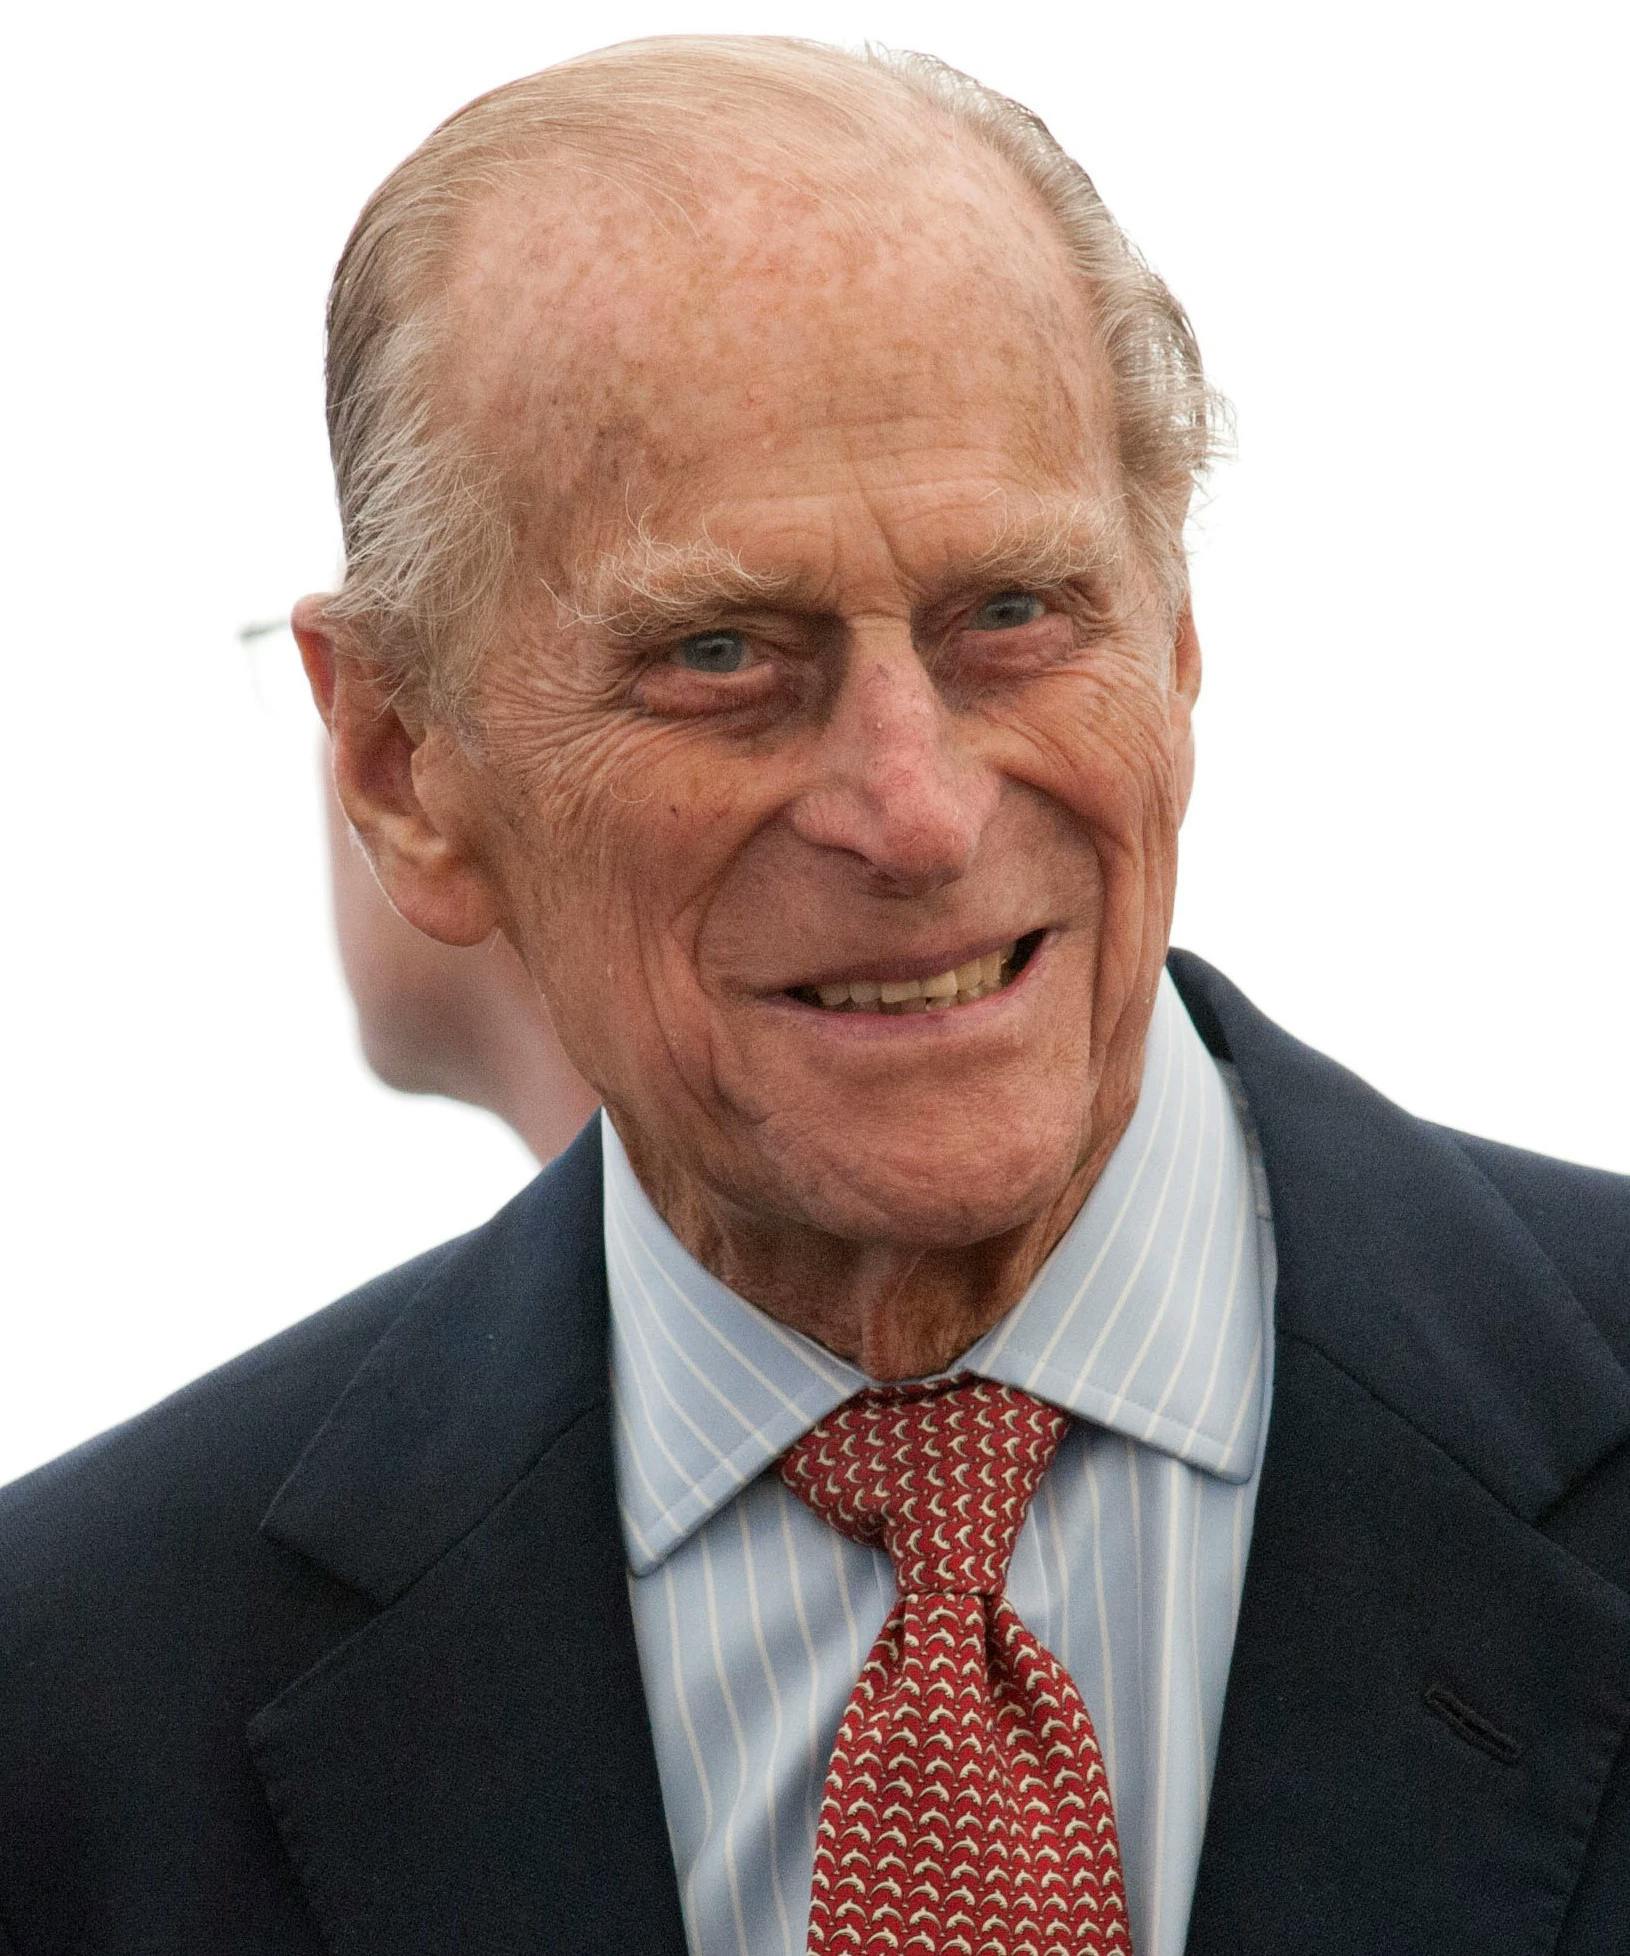 Prince Philip, Husband Of Queen Elizabeth, Has Died At 99